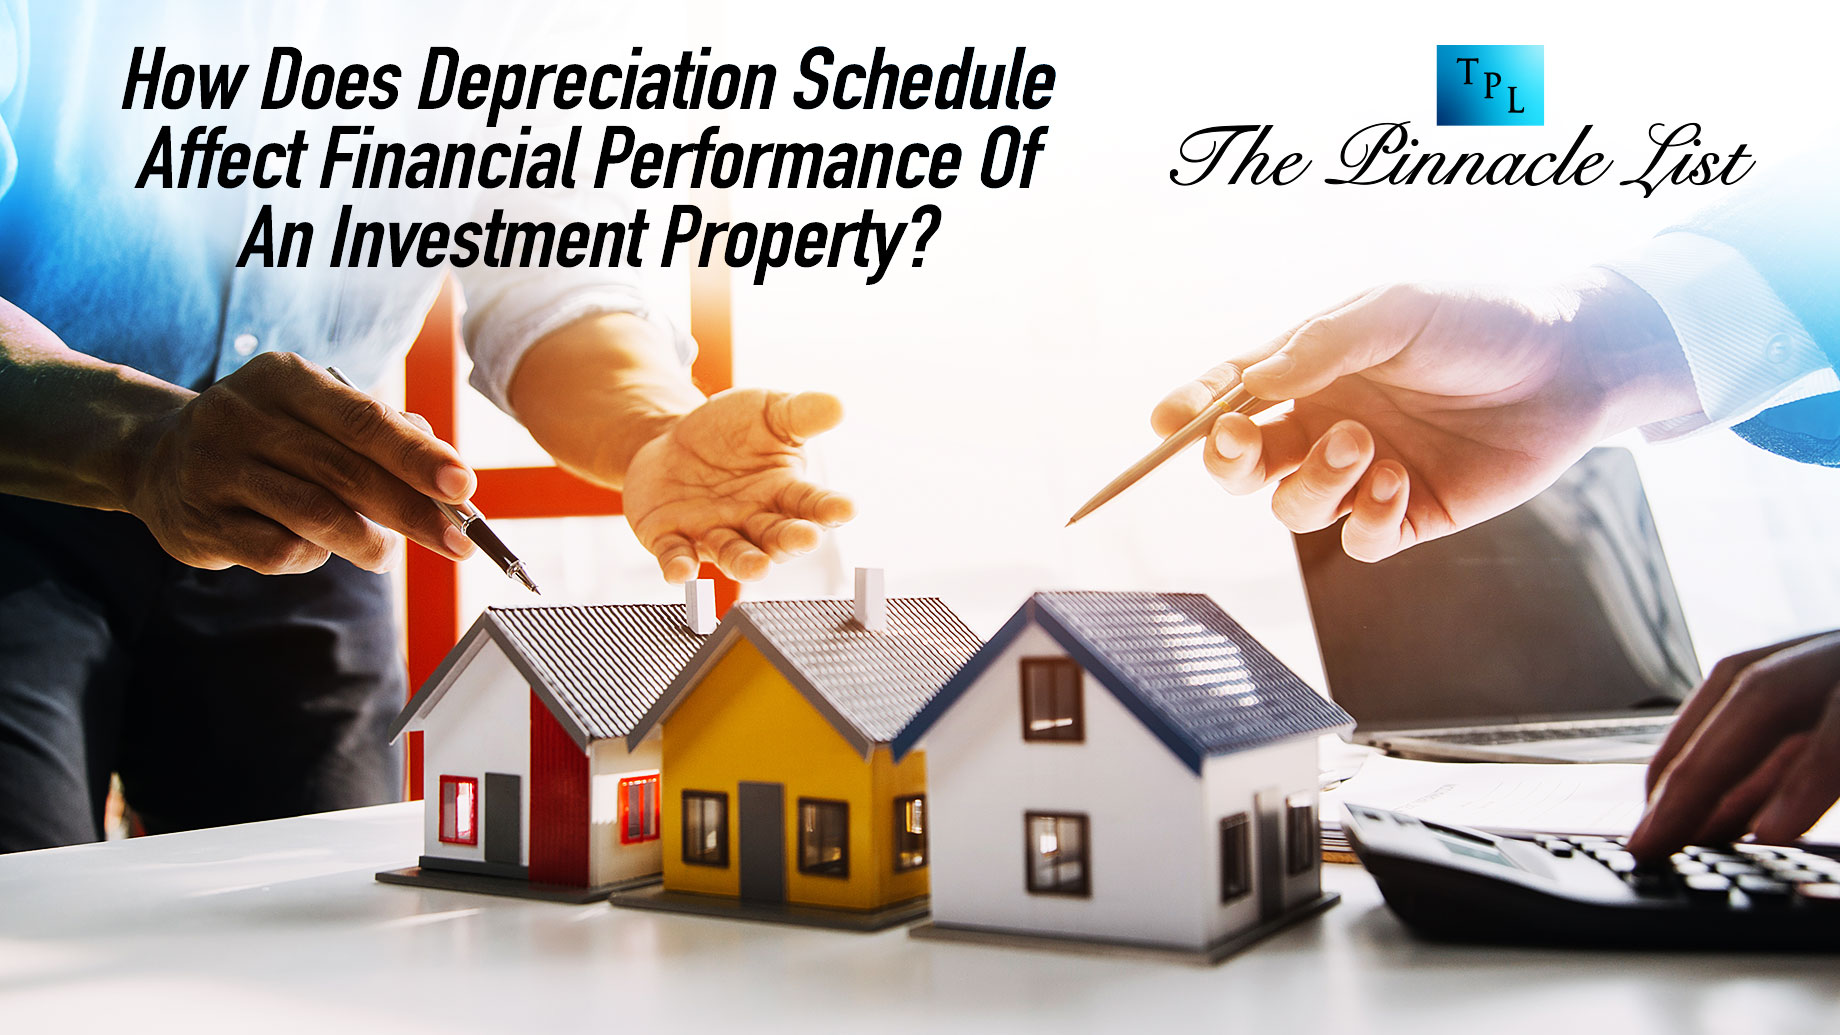 How Does Depreciation Schedule Affect Financial Performance Of An Investment Property?